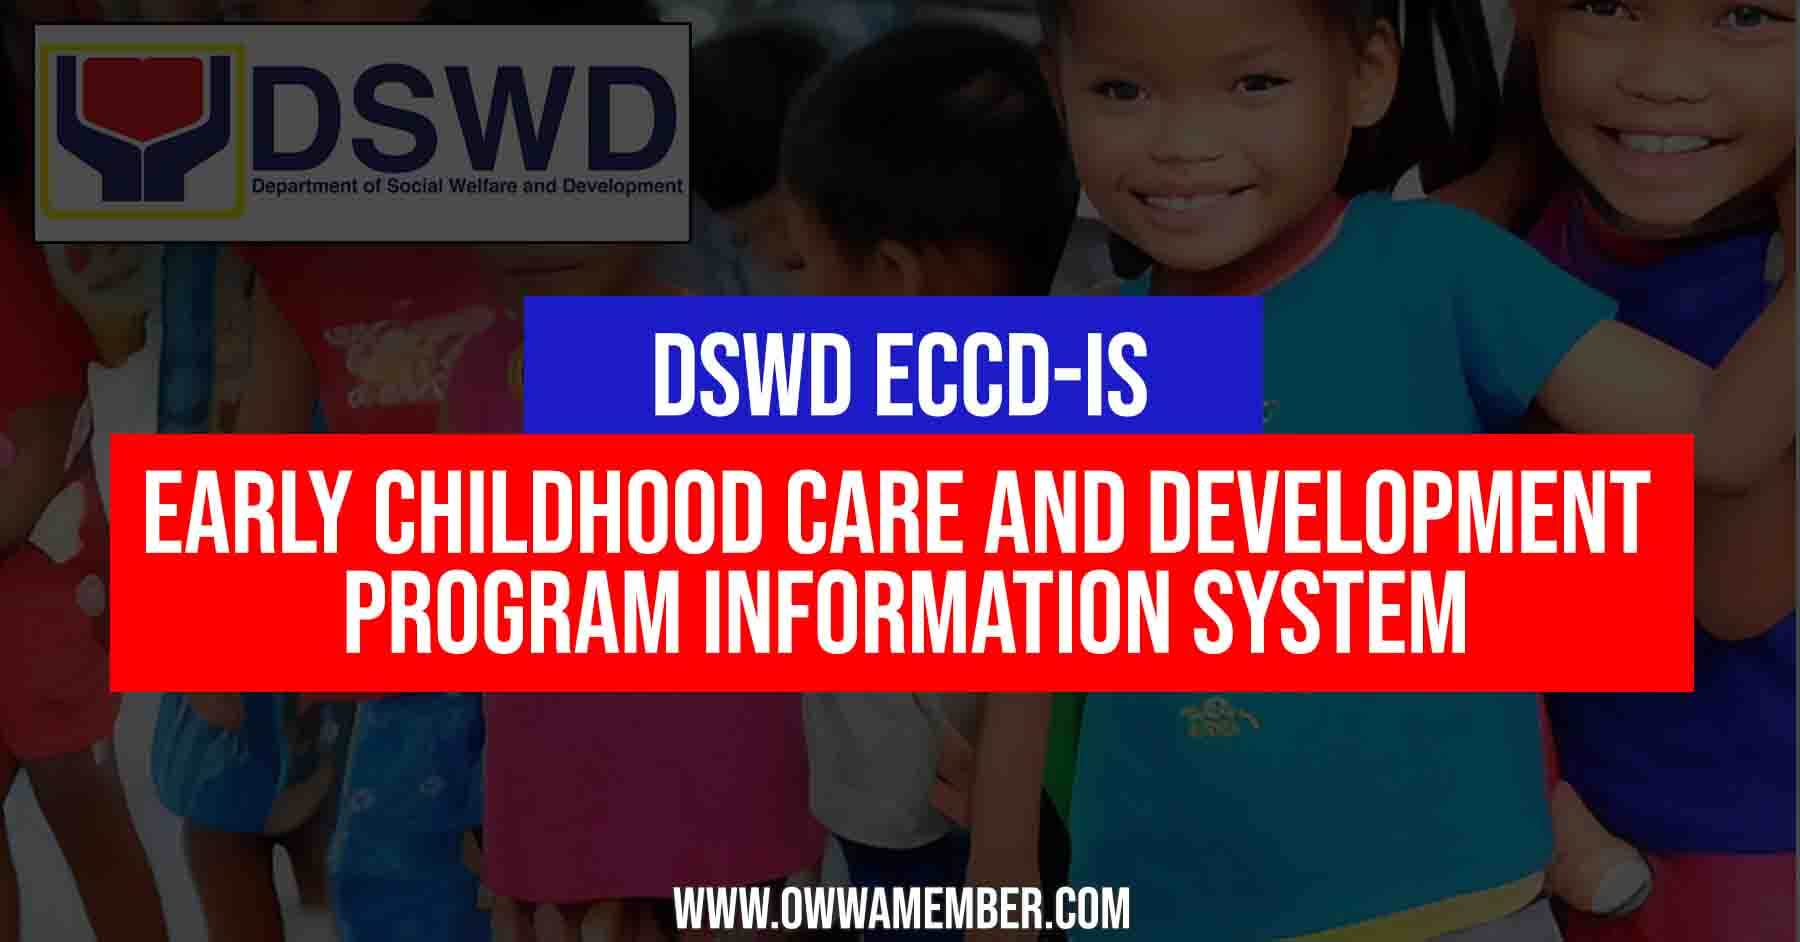 DSWD early childhood care and development information system